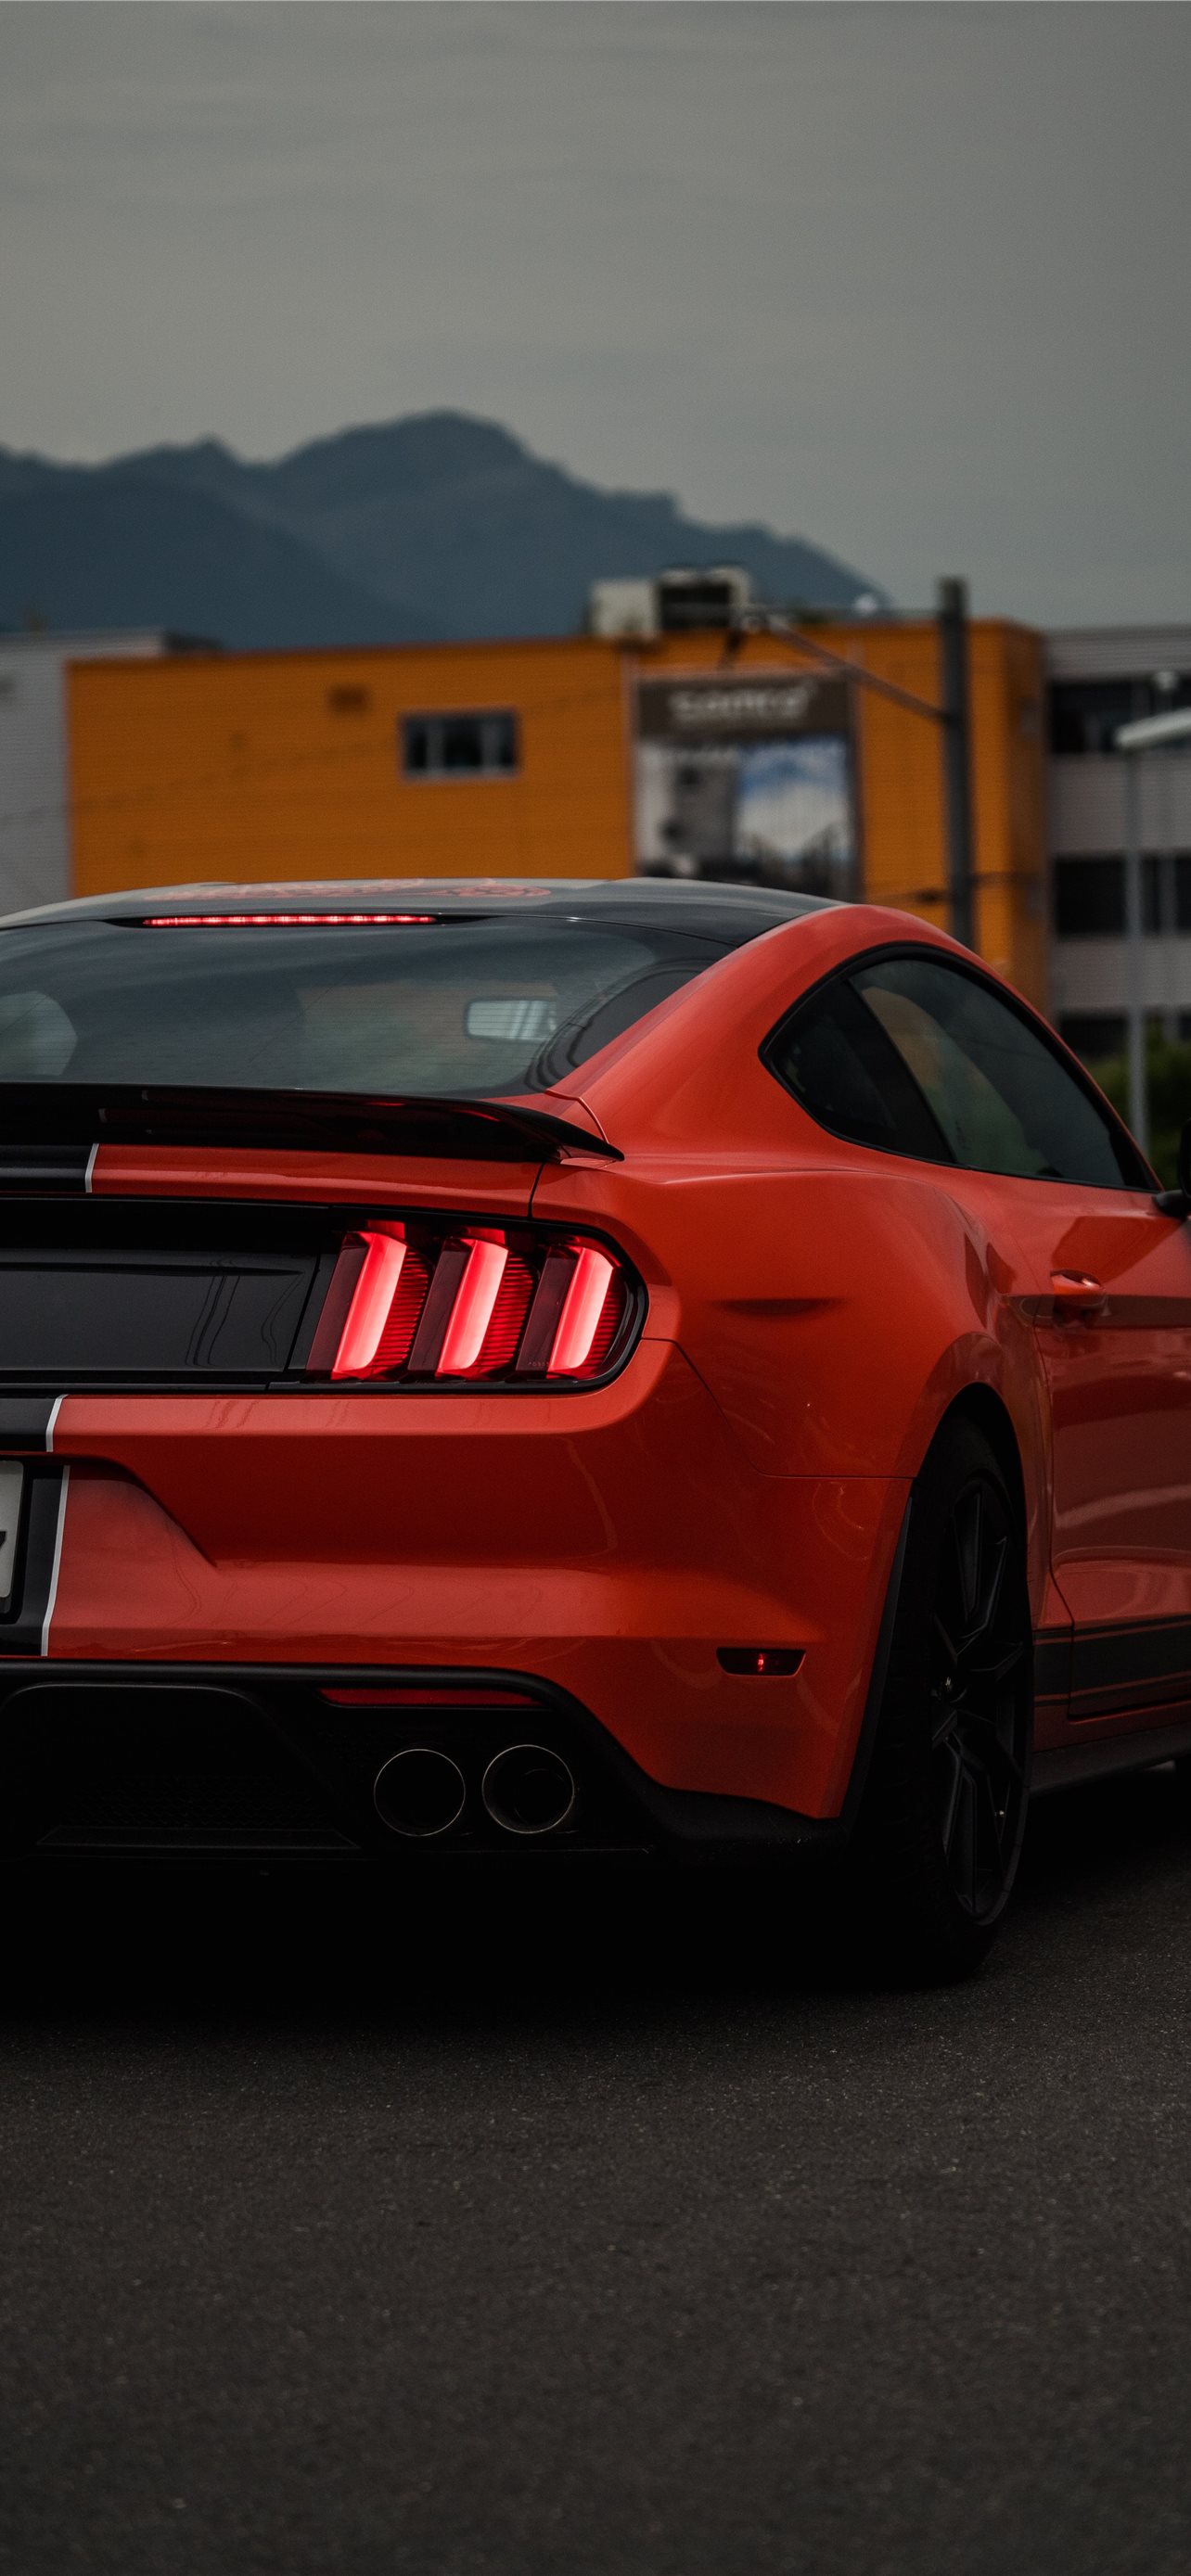 Ford Mustang iPhone Wallpaper  Ford mustang wallpaper Mustang wallpaper Mustang  iphone wallpaper